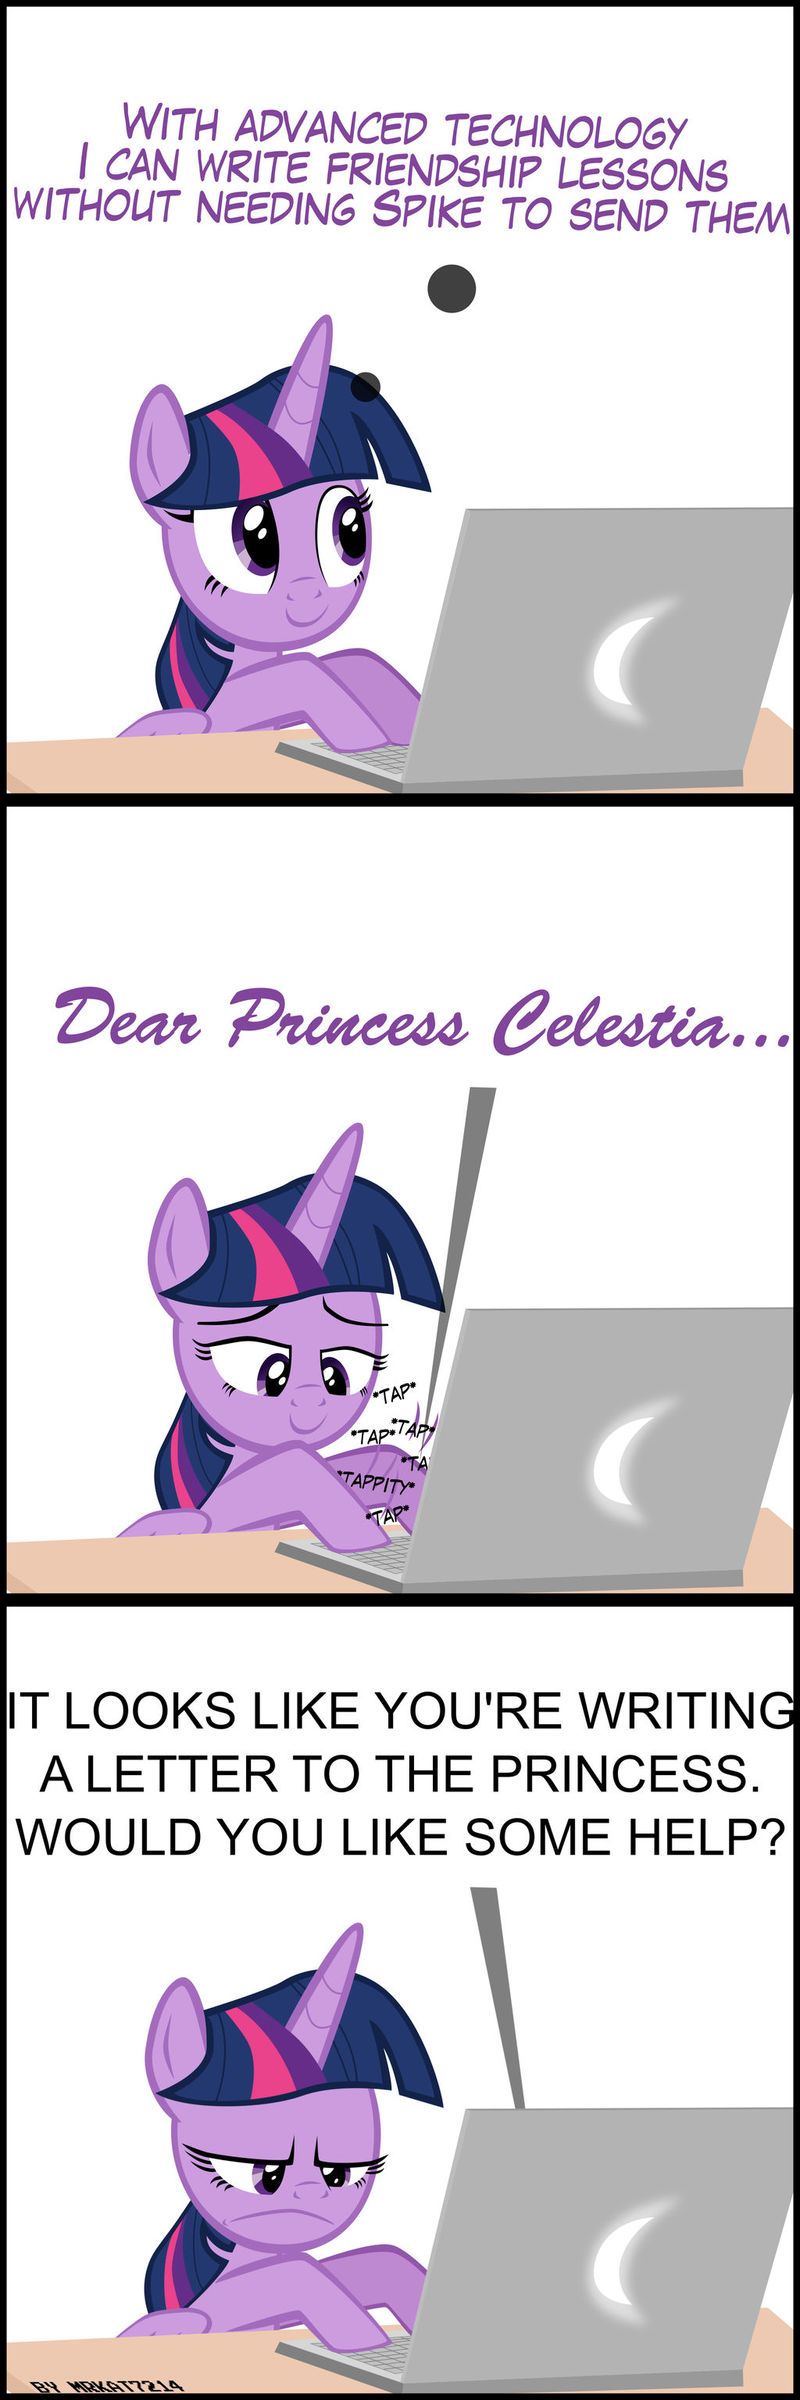 Comic 2 - Twilight's New Form of Writing Letters